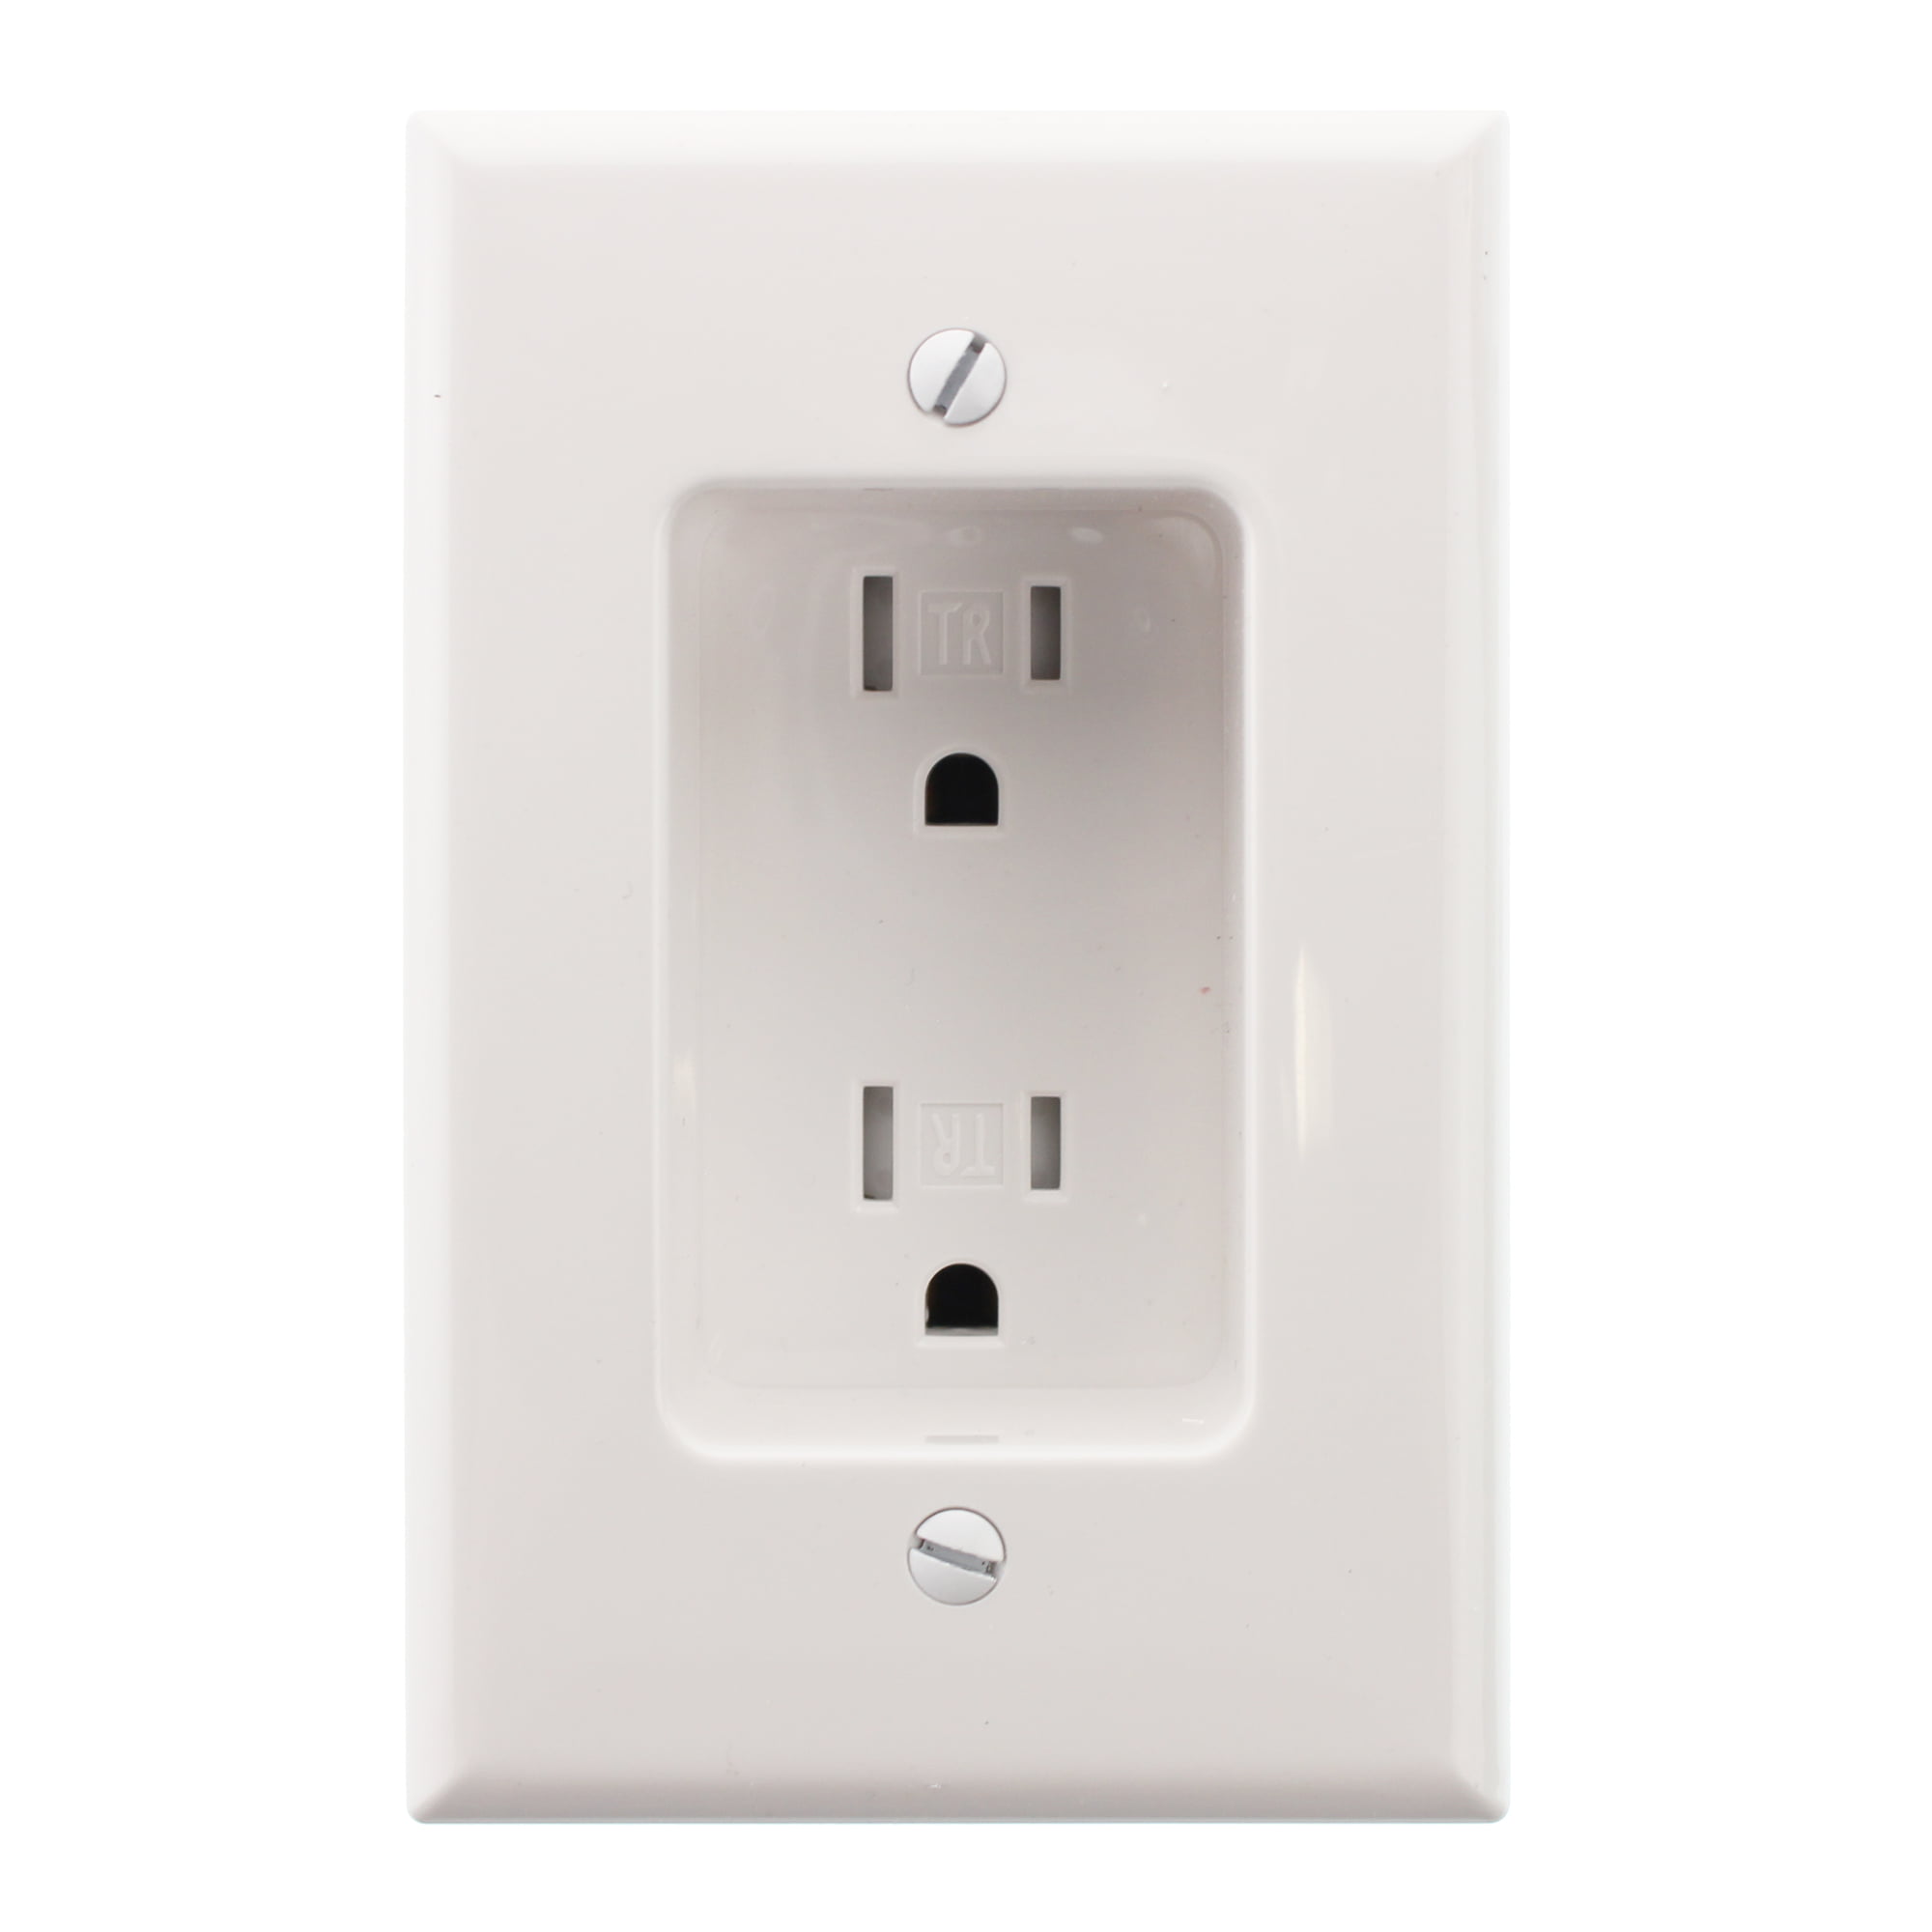 NEW through wall air conditioners Hubbell 15-Amp White Single Electrical Outlet